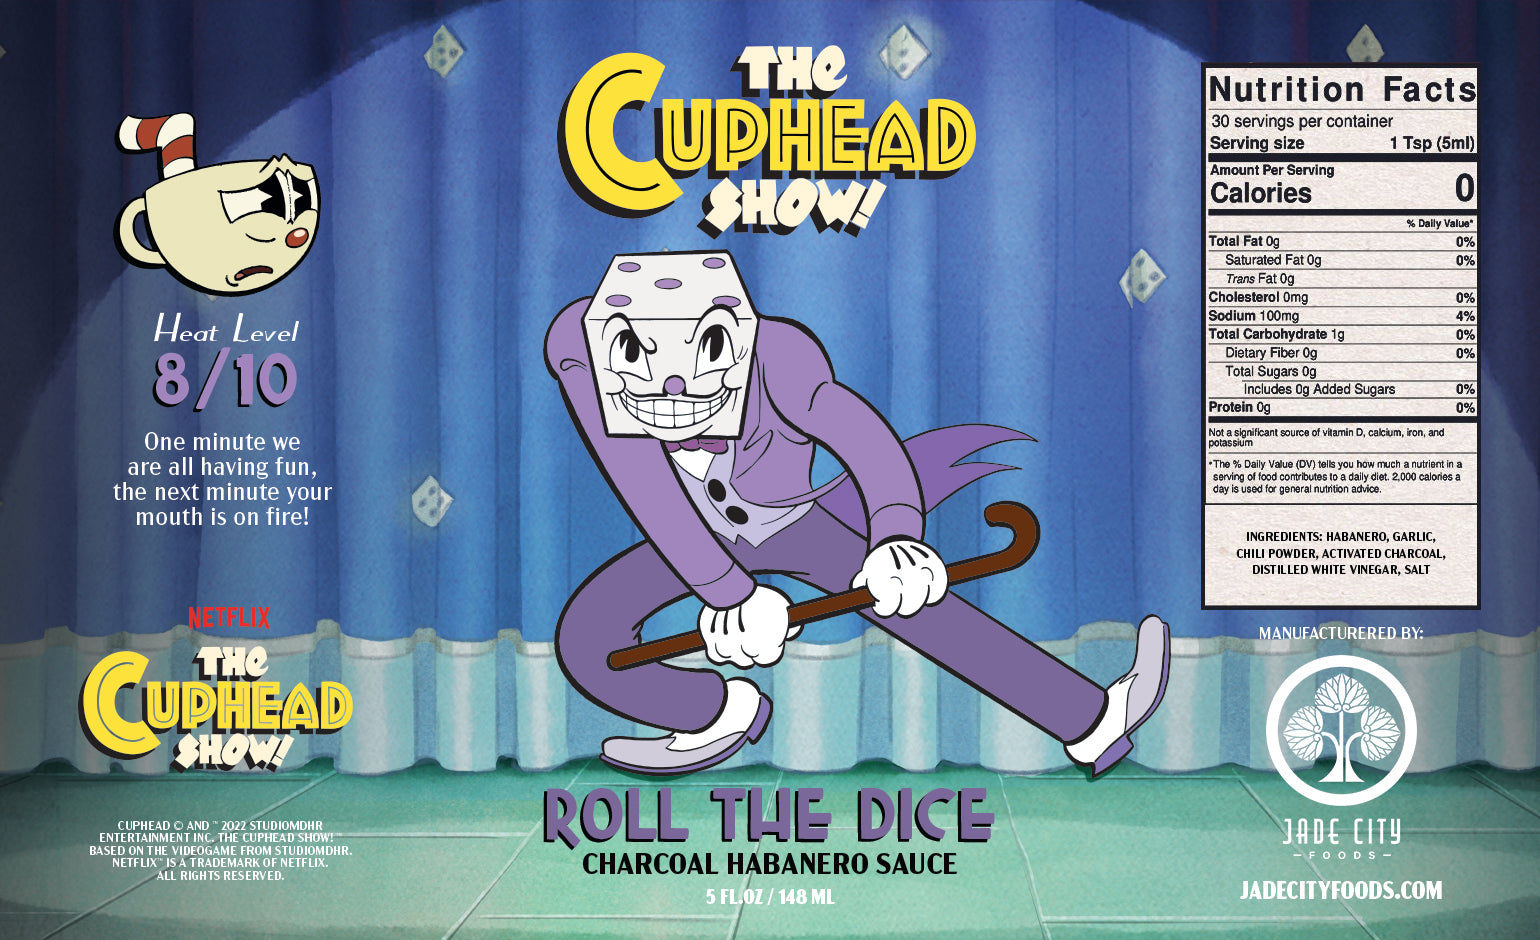 King Dice's Roll The Dice: Charcoal Habanero Sauce